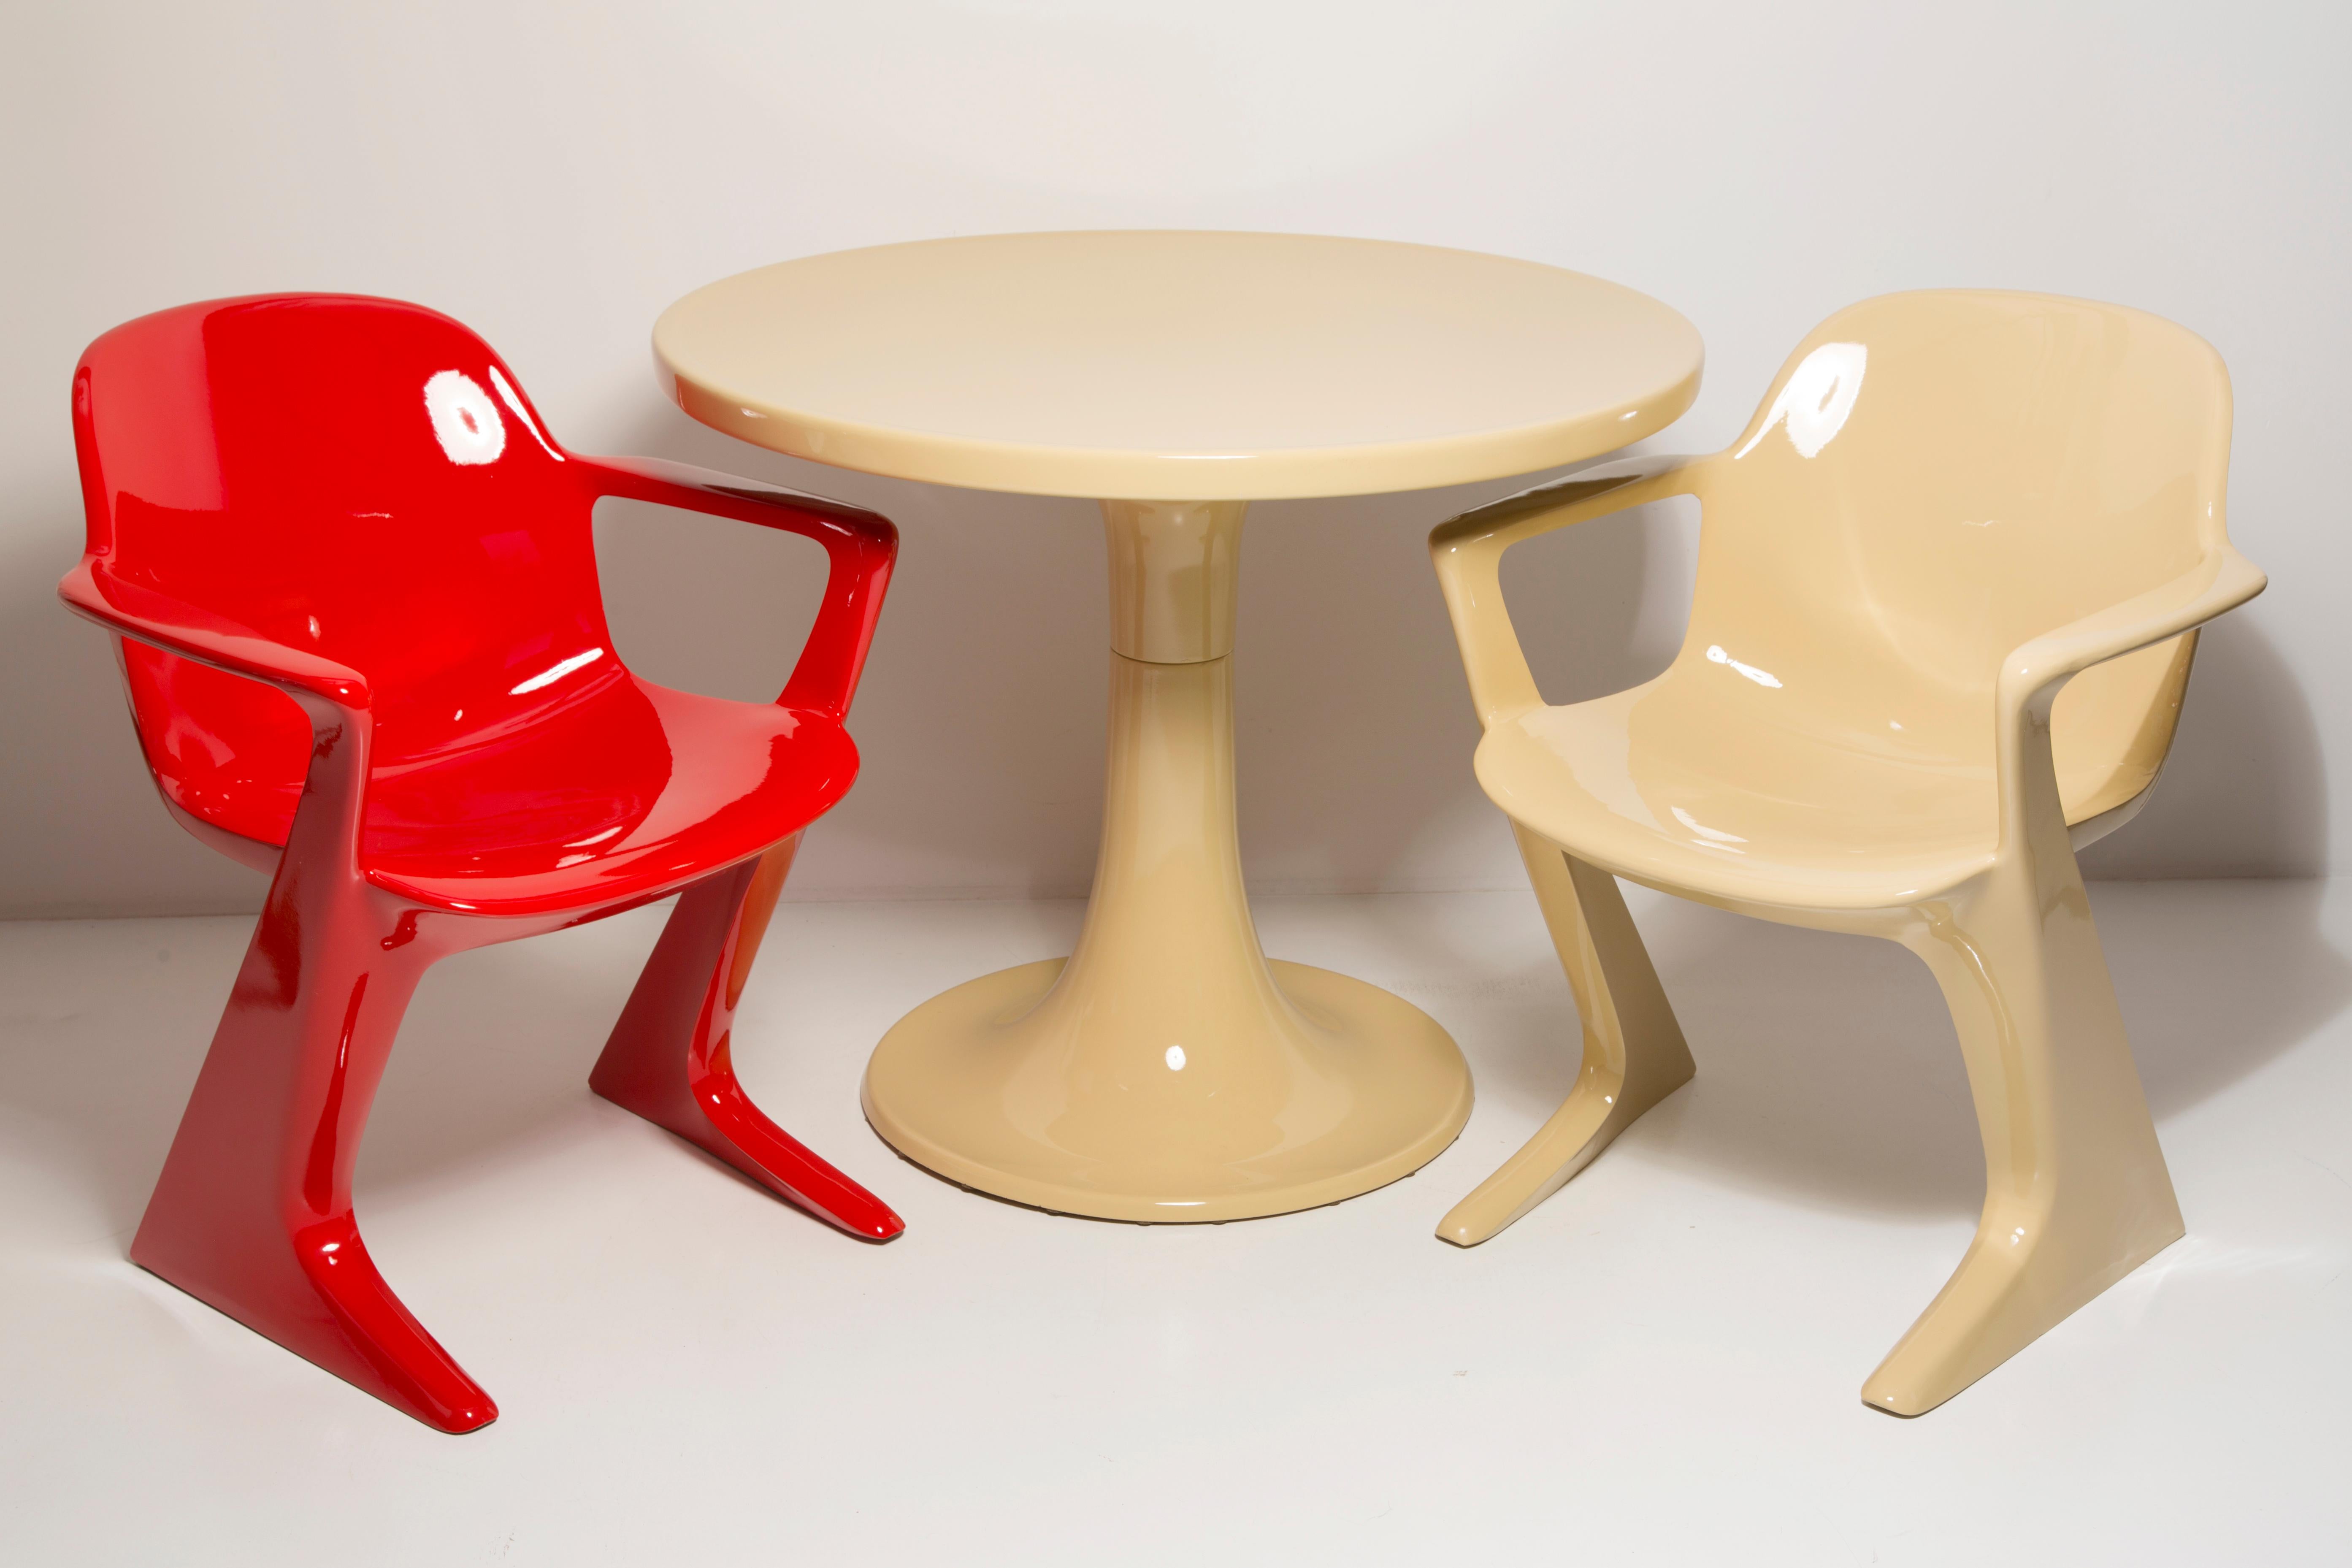 Set of Six Midcentury Signal Red Kangaroo Chairs, Ernst Moeckl, Germany, 1968 For Sale 4